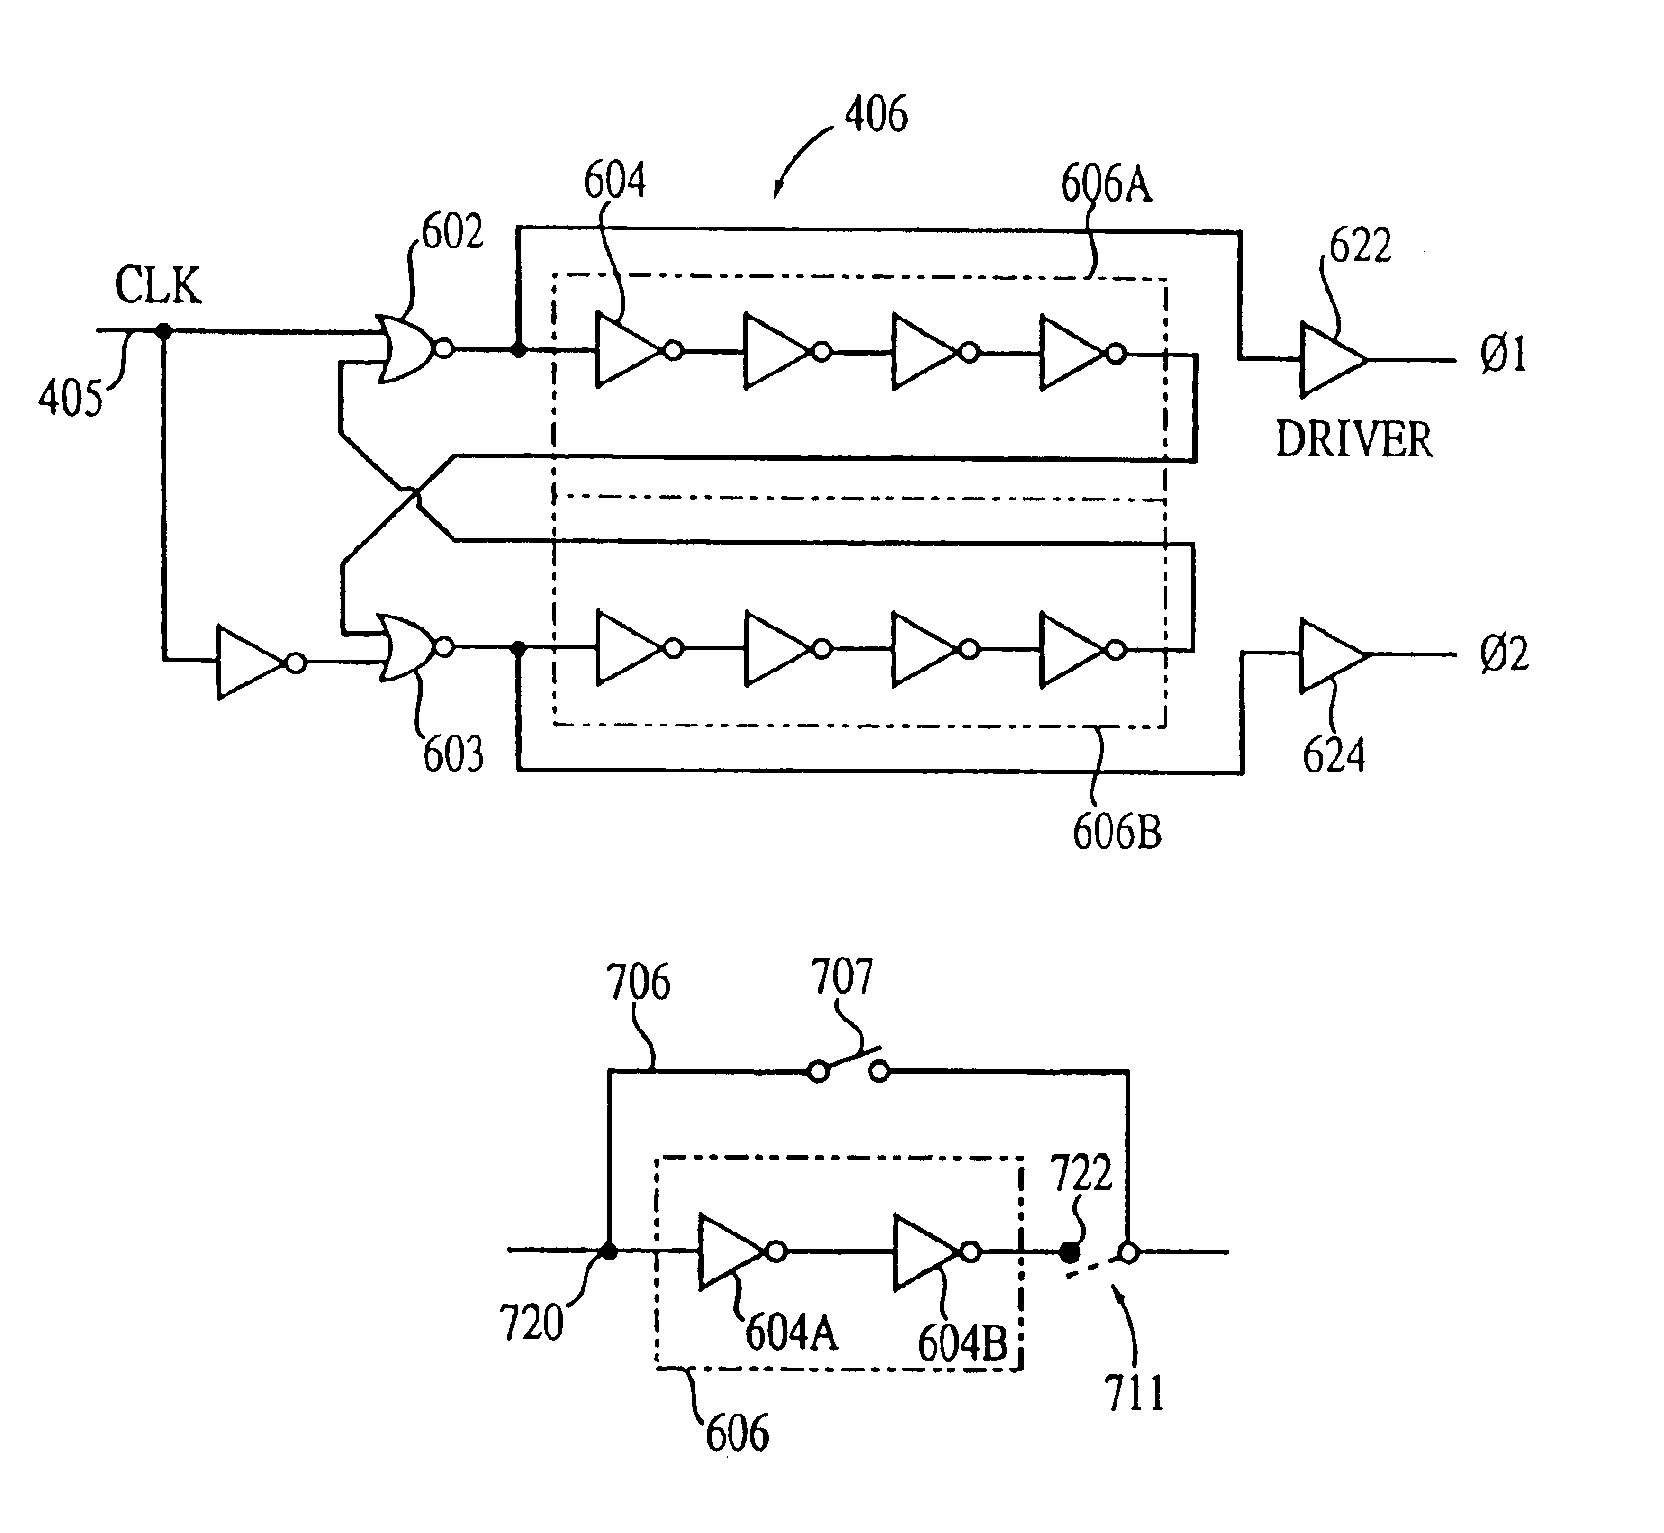 Clock generator with programmable non-overlapping-clock-edge capability